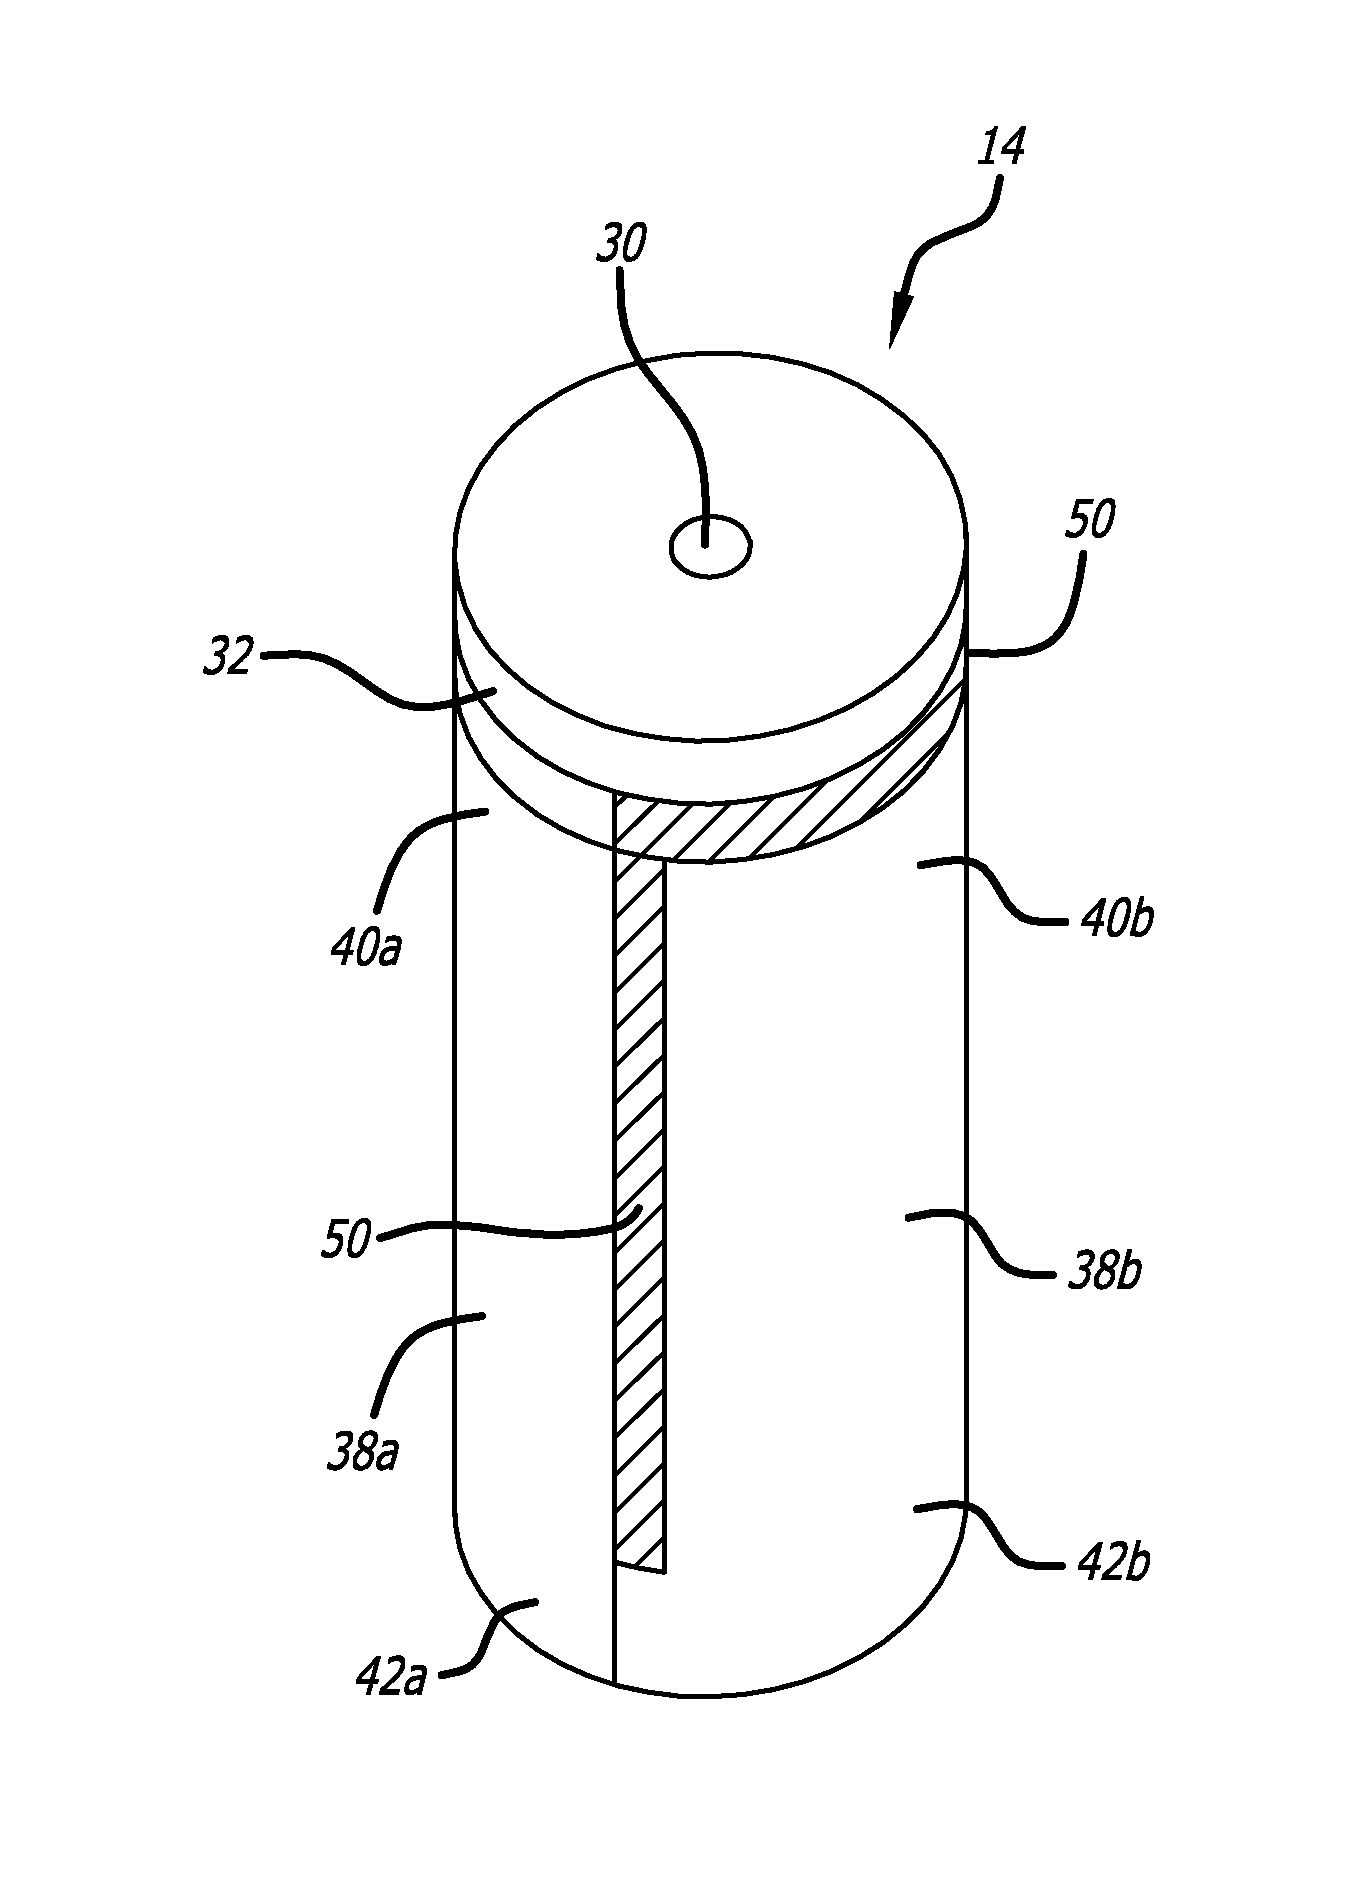 Chemical oxygen generator with chemical cores arranged in parallel